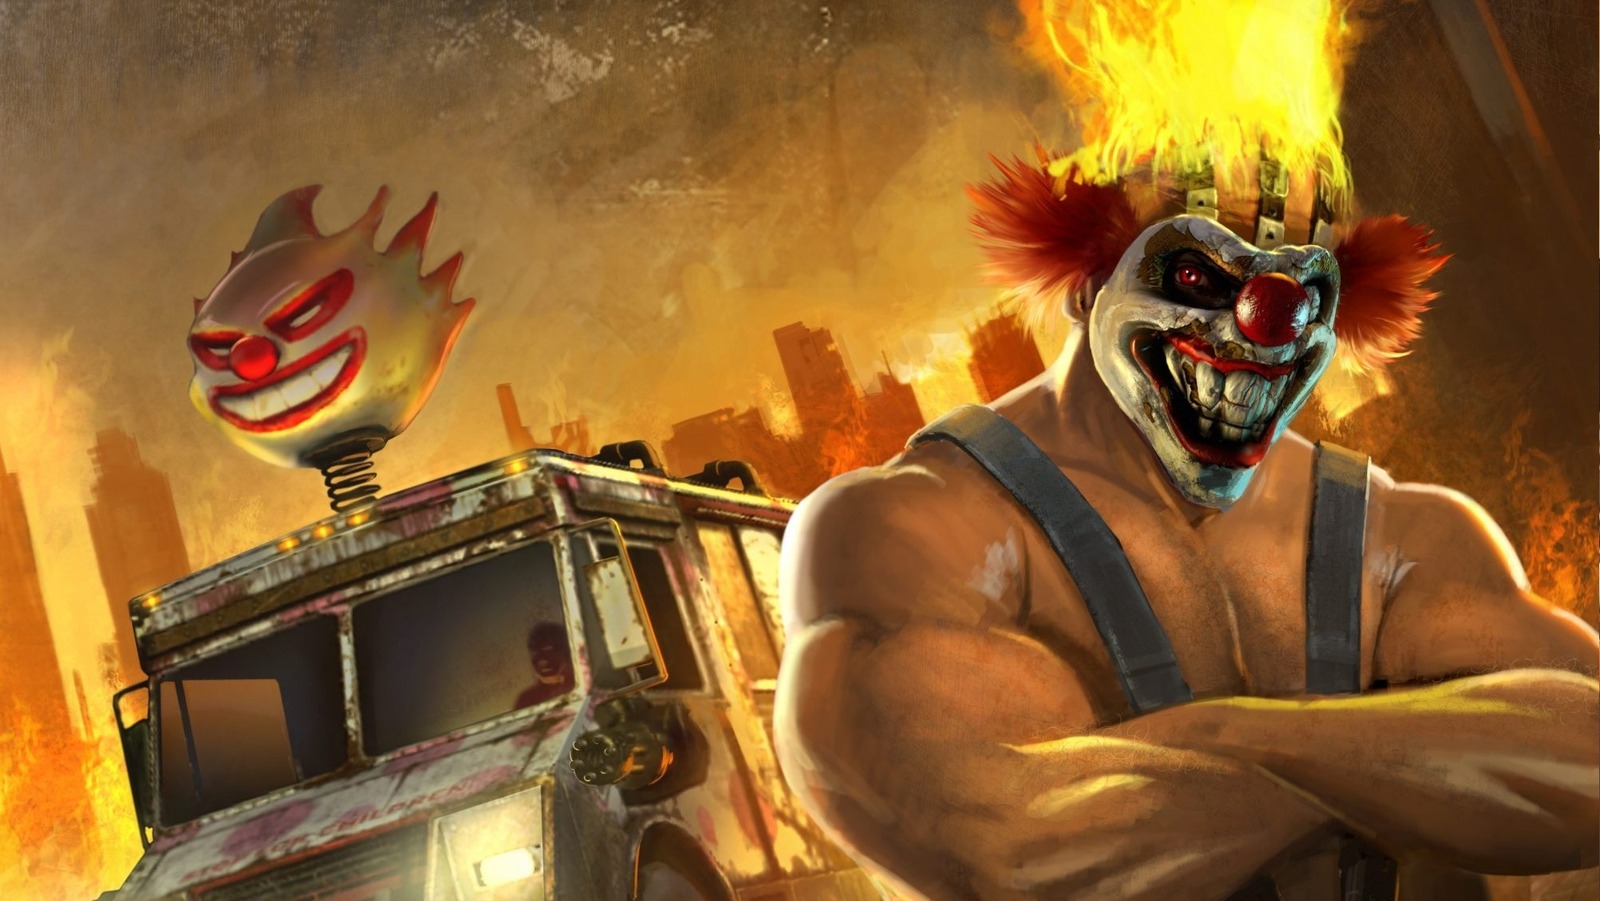 The Untold Truth Of Peacock's Twisted Metal